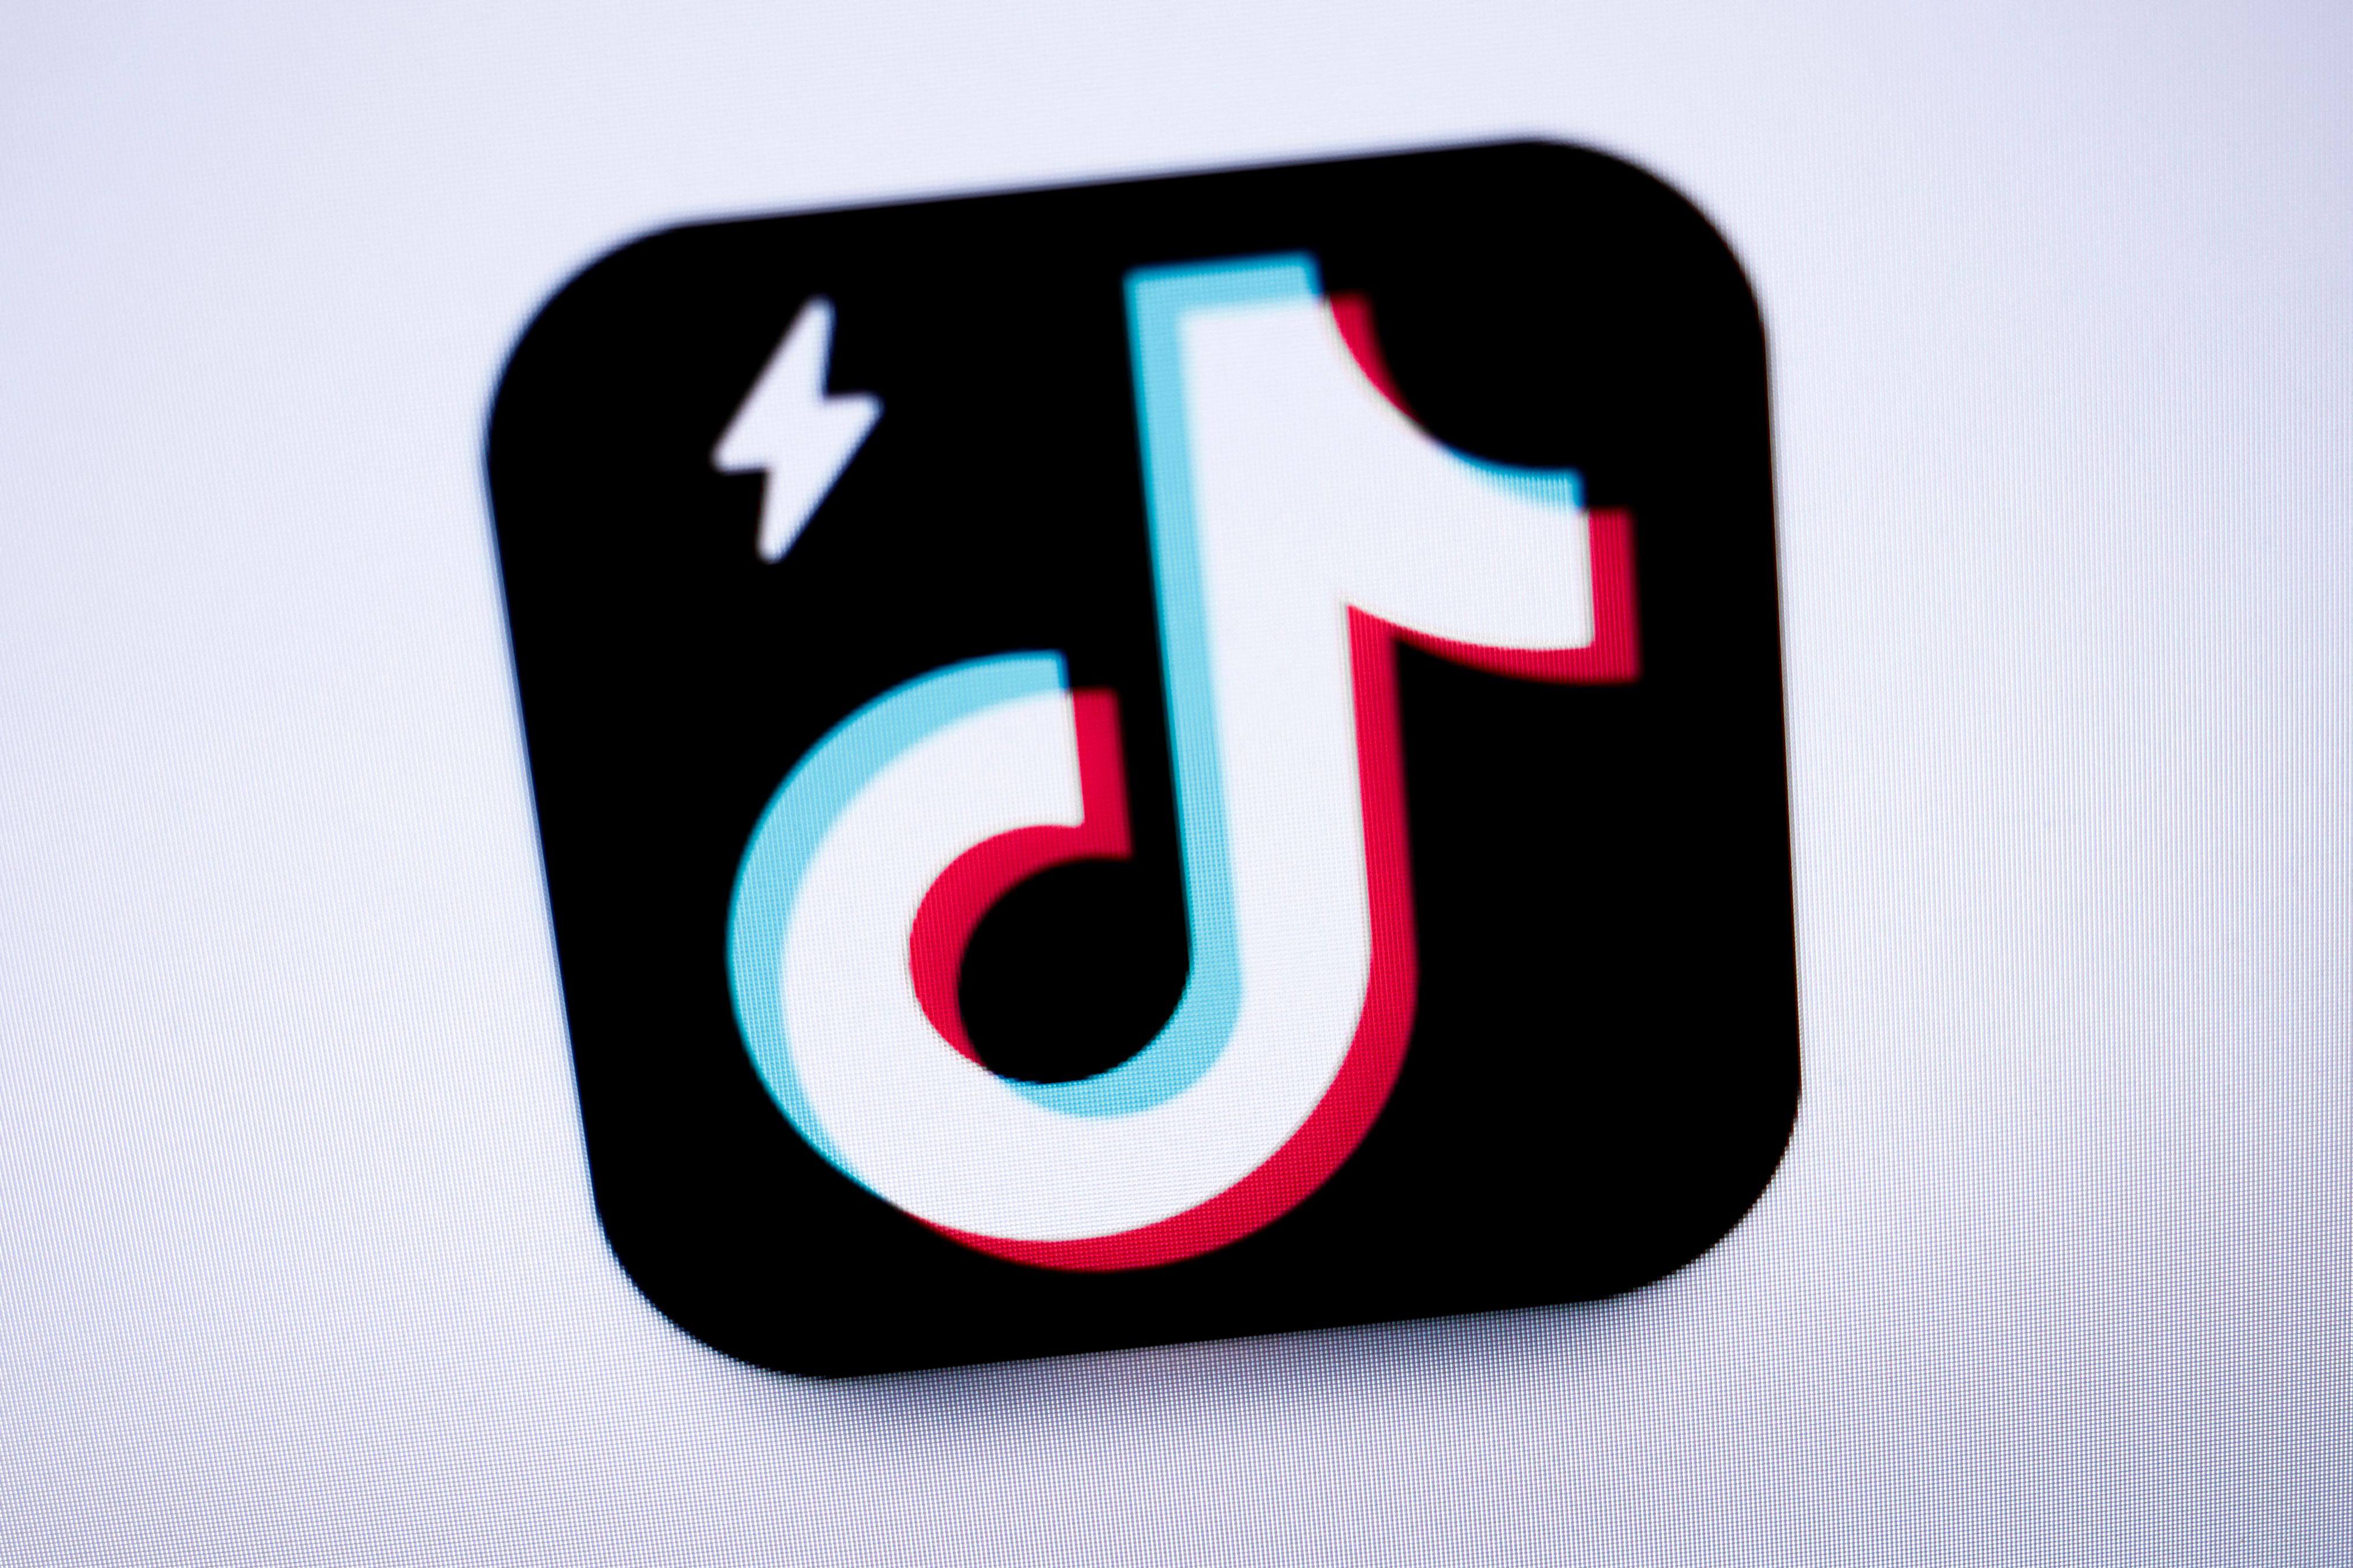 US lawyers representing young people and their families allege that the overseas version of TikTok protects children in China in ways that the US version does not. Photo: AFP